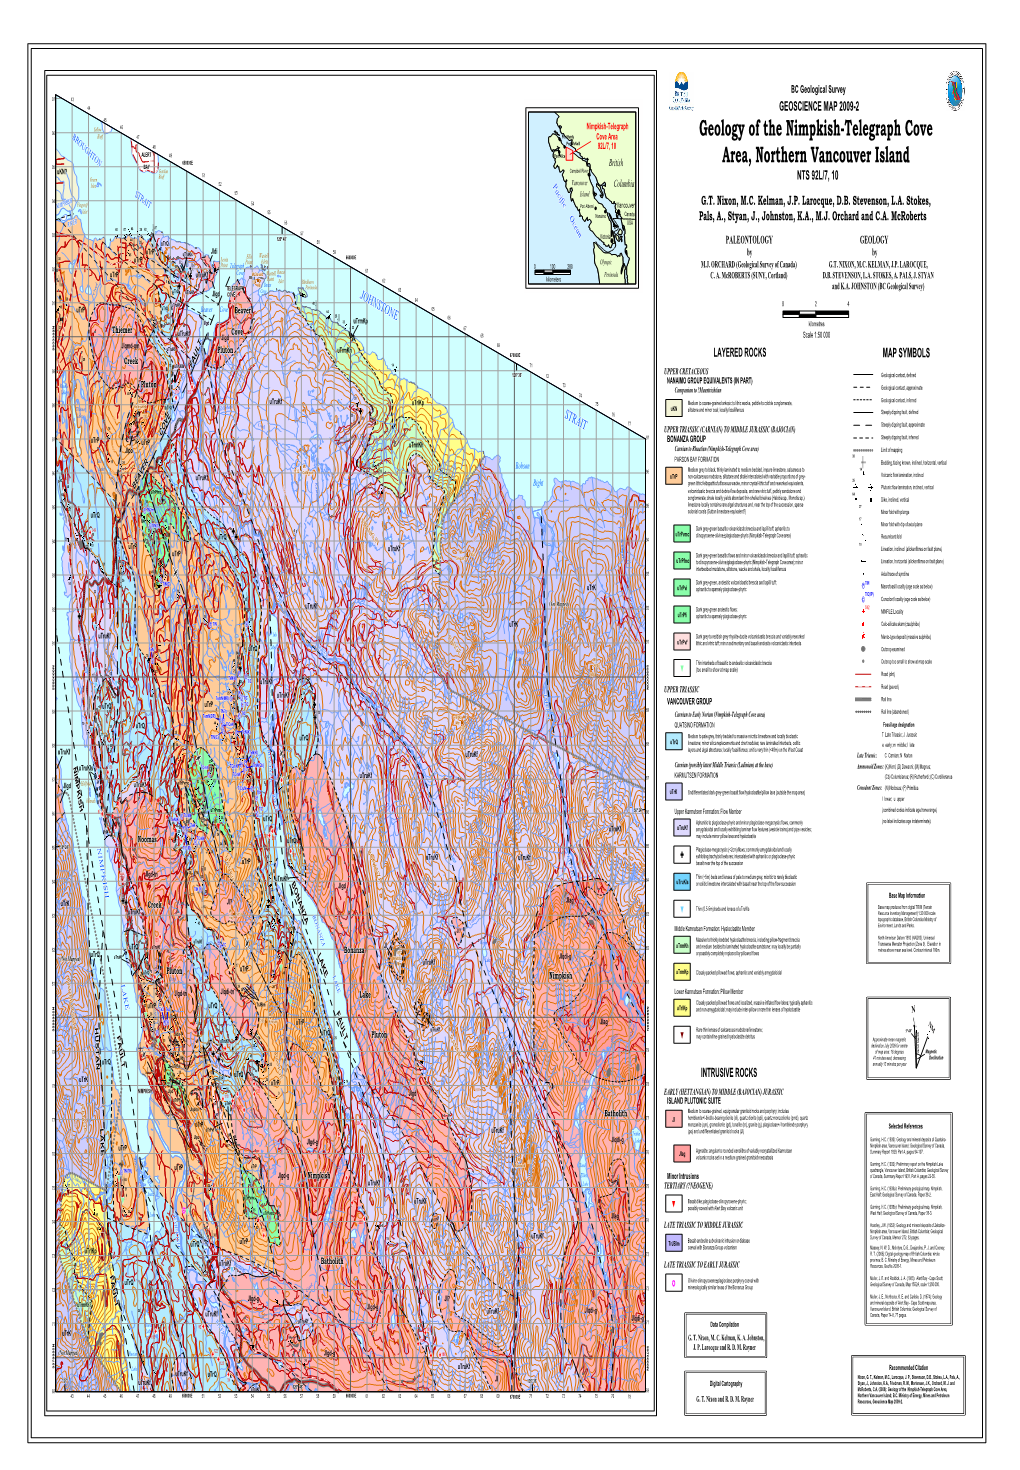 Geology of the Nimpkish-Telegraph Cove Area, Northern Vancouver